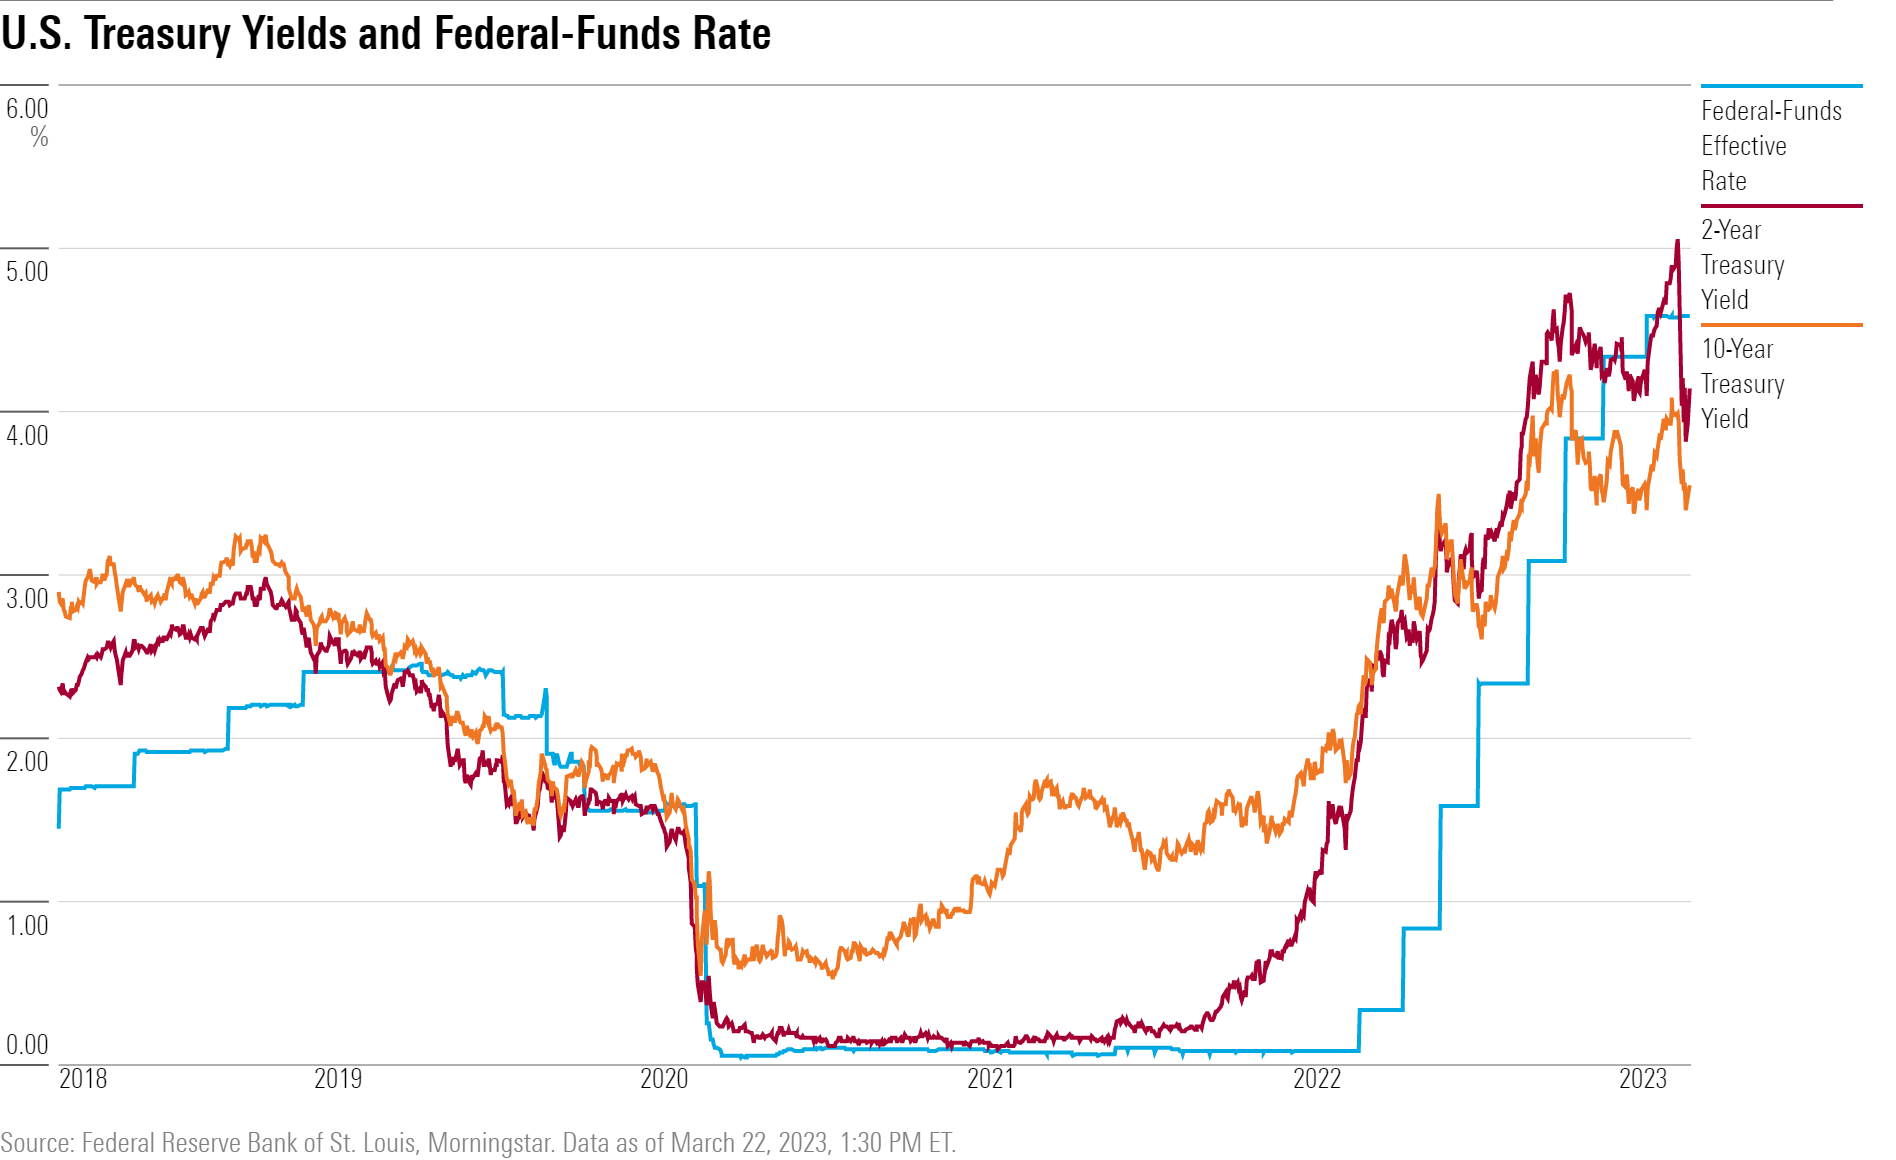 Line chart showing federal-funds effective rate vs. two-year and ten-year Treasury yields.